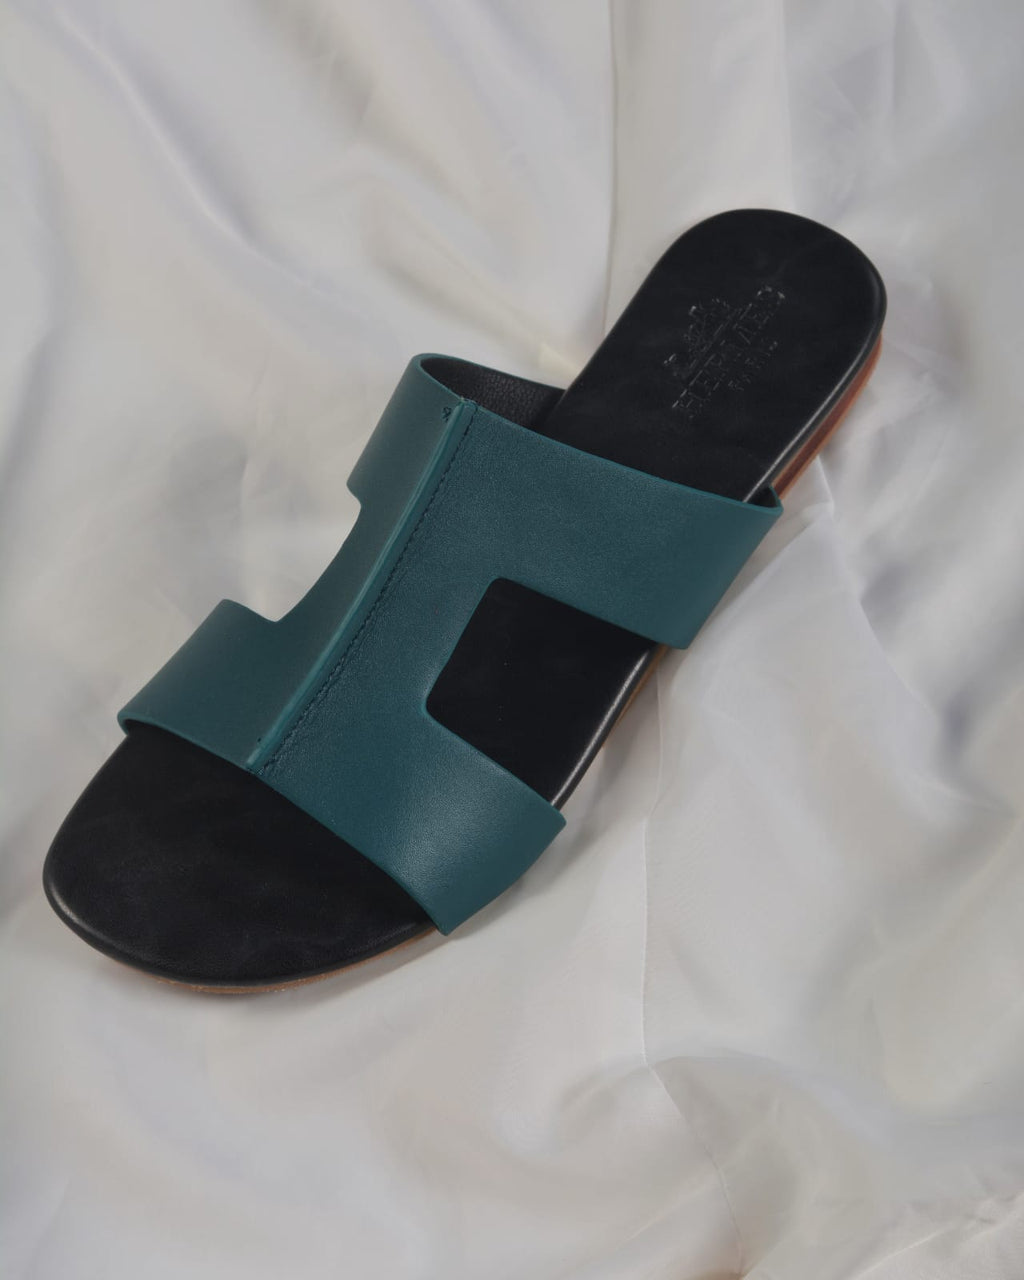 H CUT-OUT DUNES WOMEN SANDAL BLACK AND TEAL